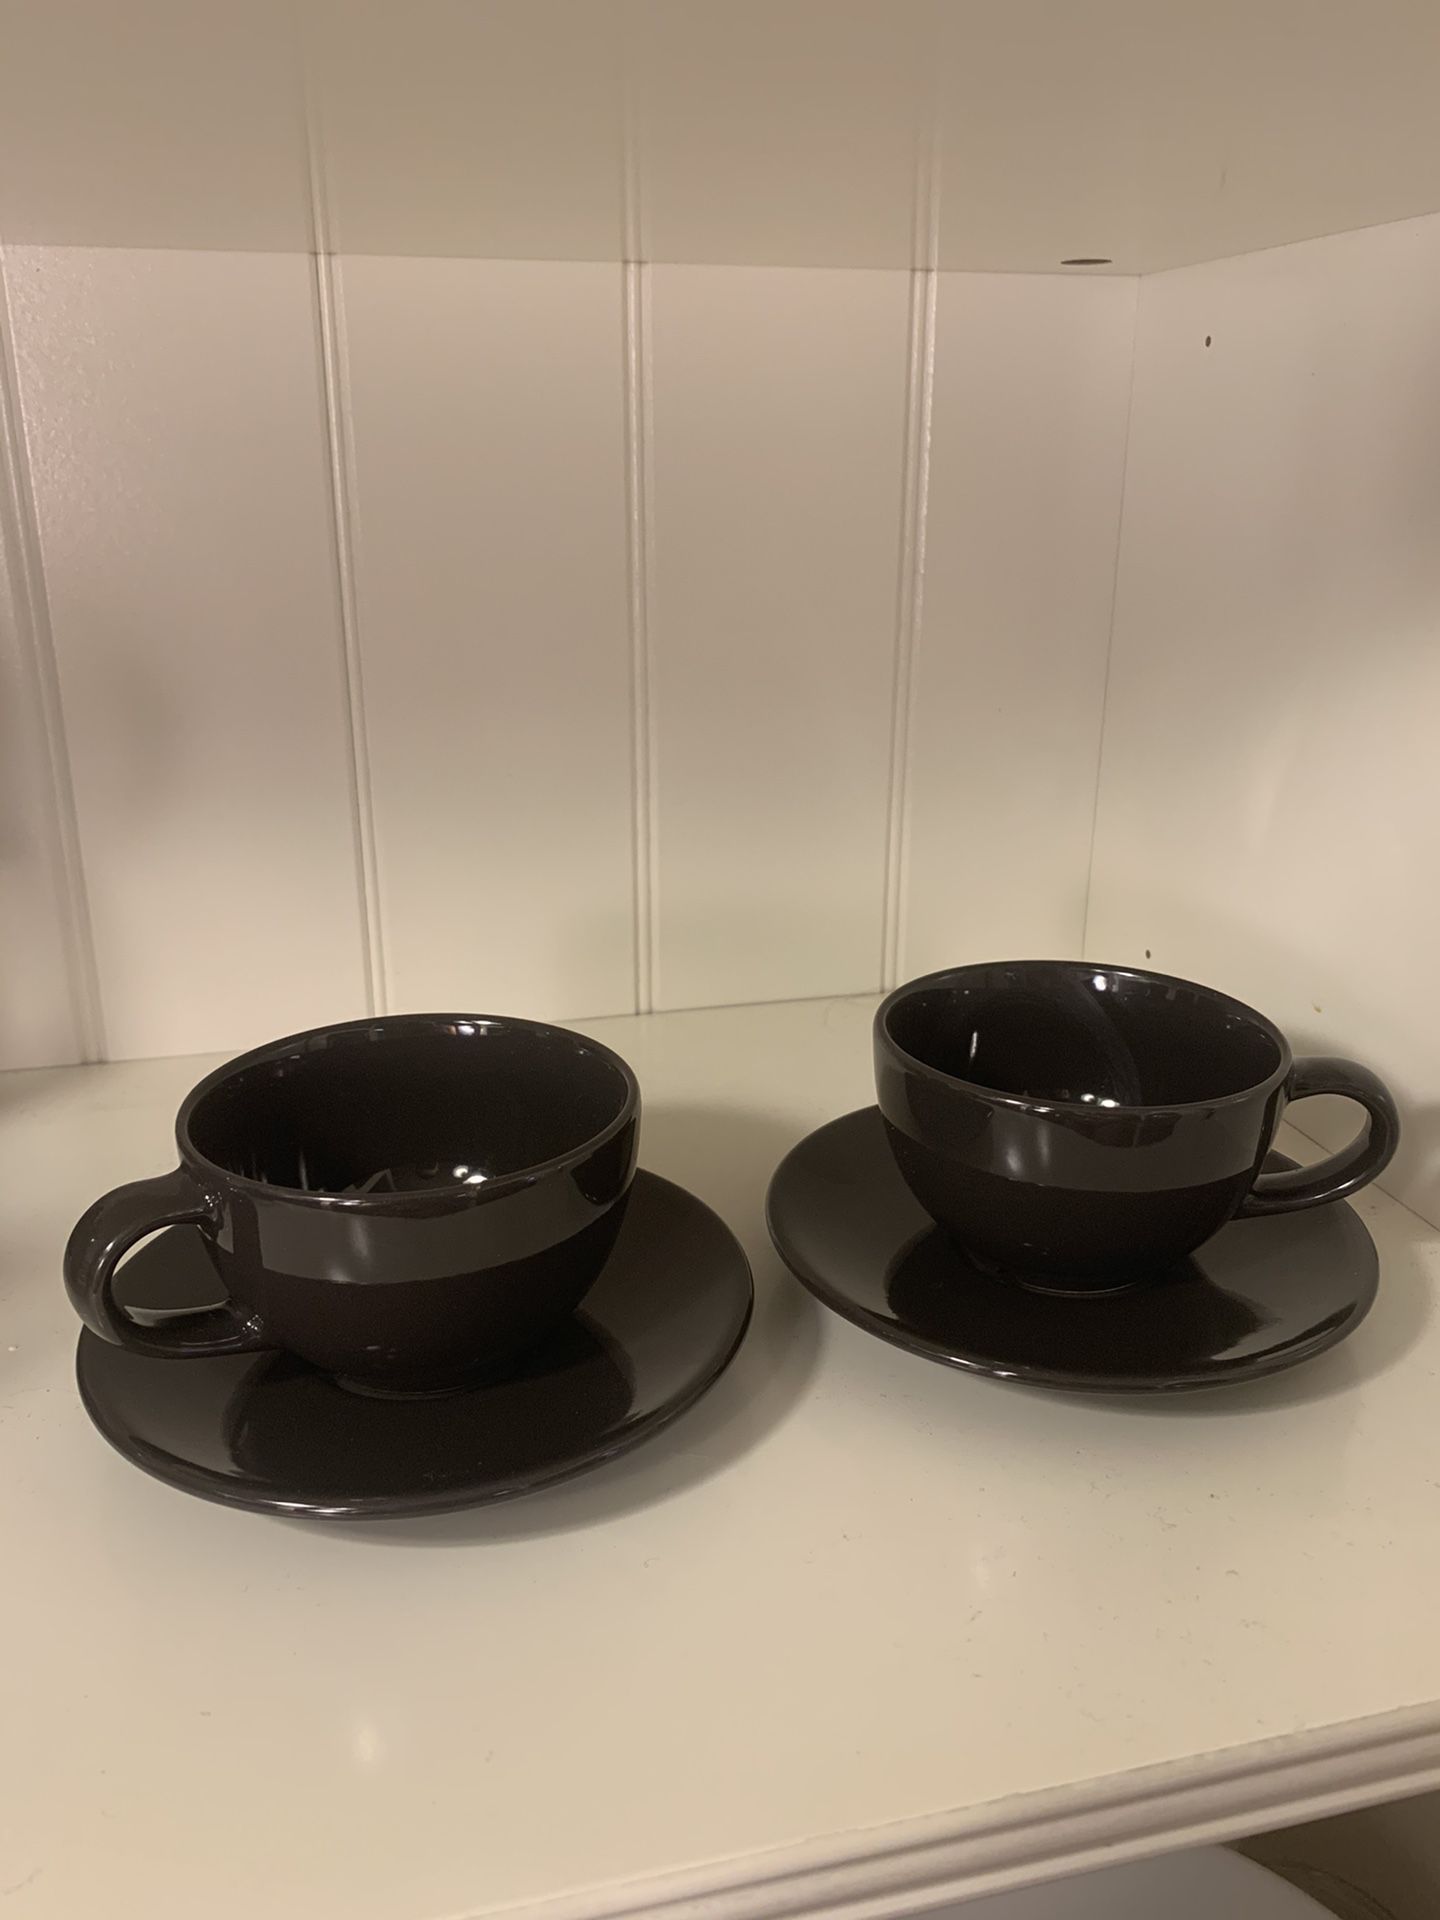 Two tea cups and saucers